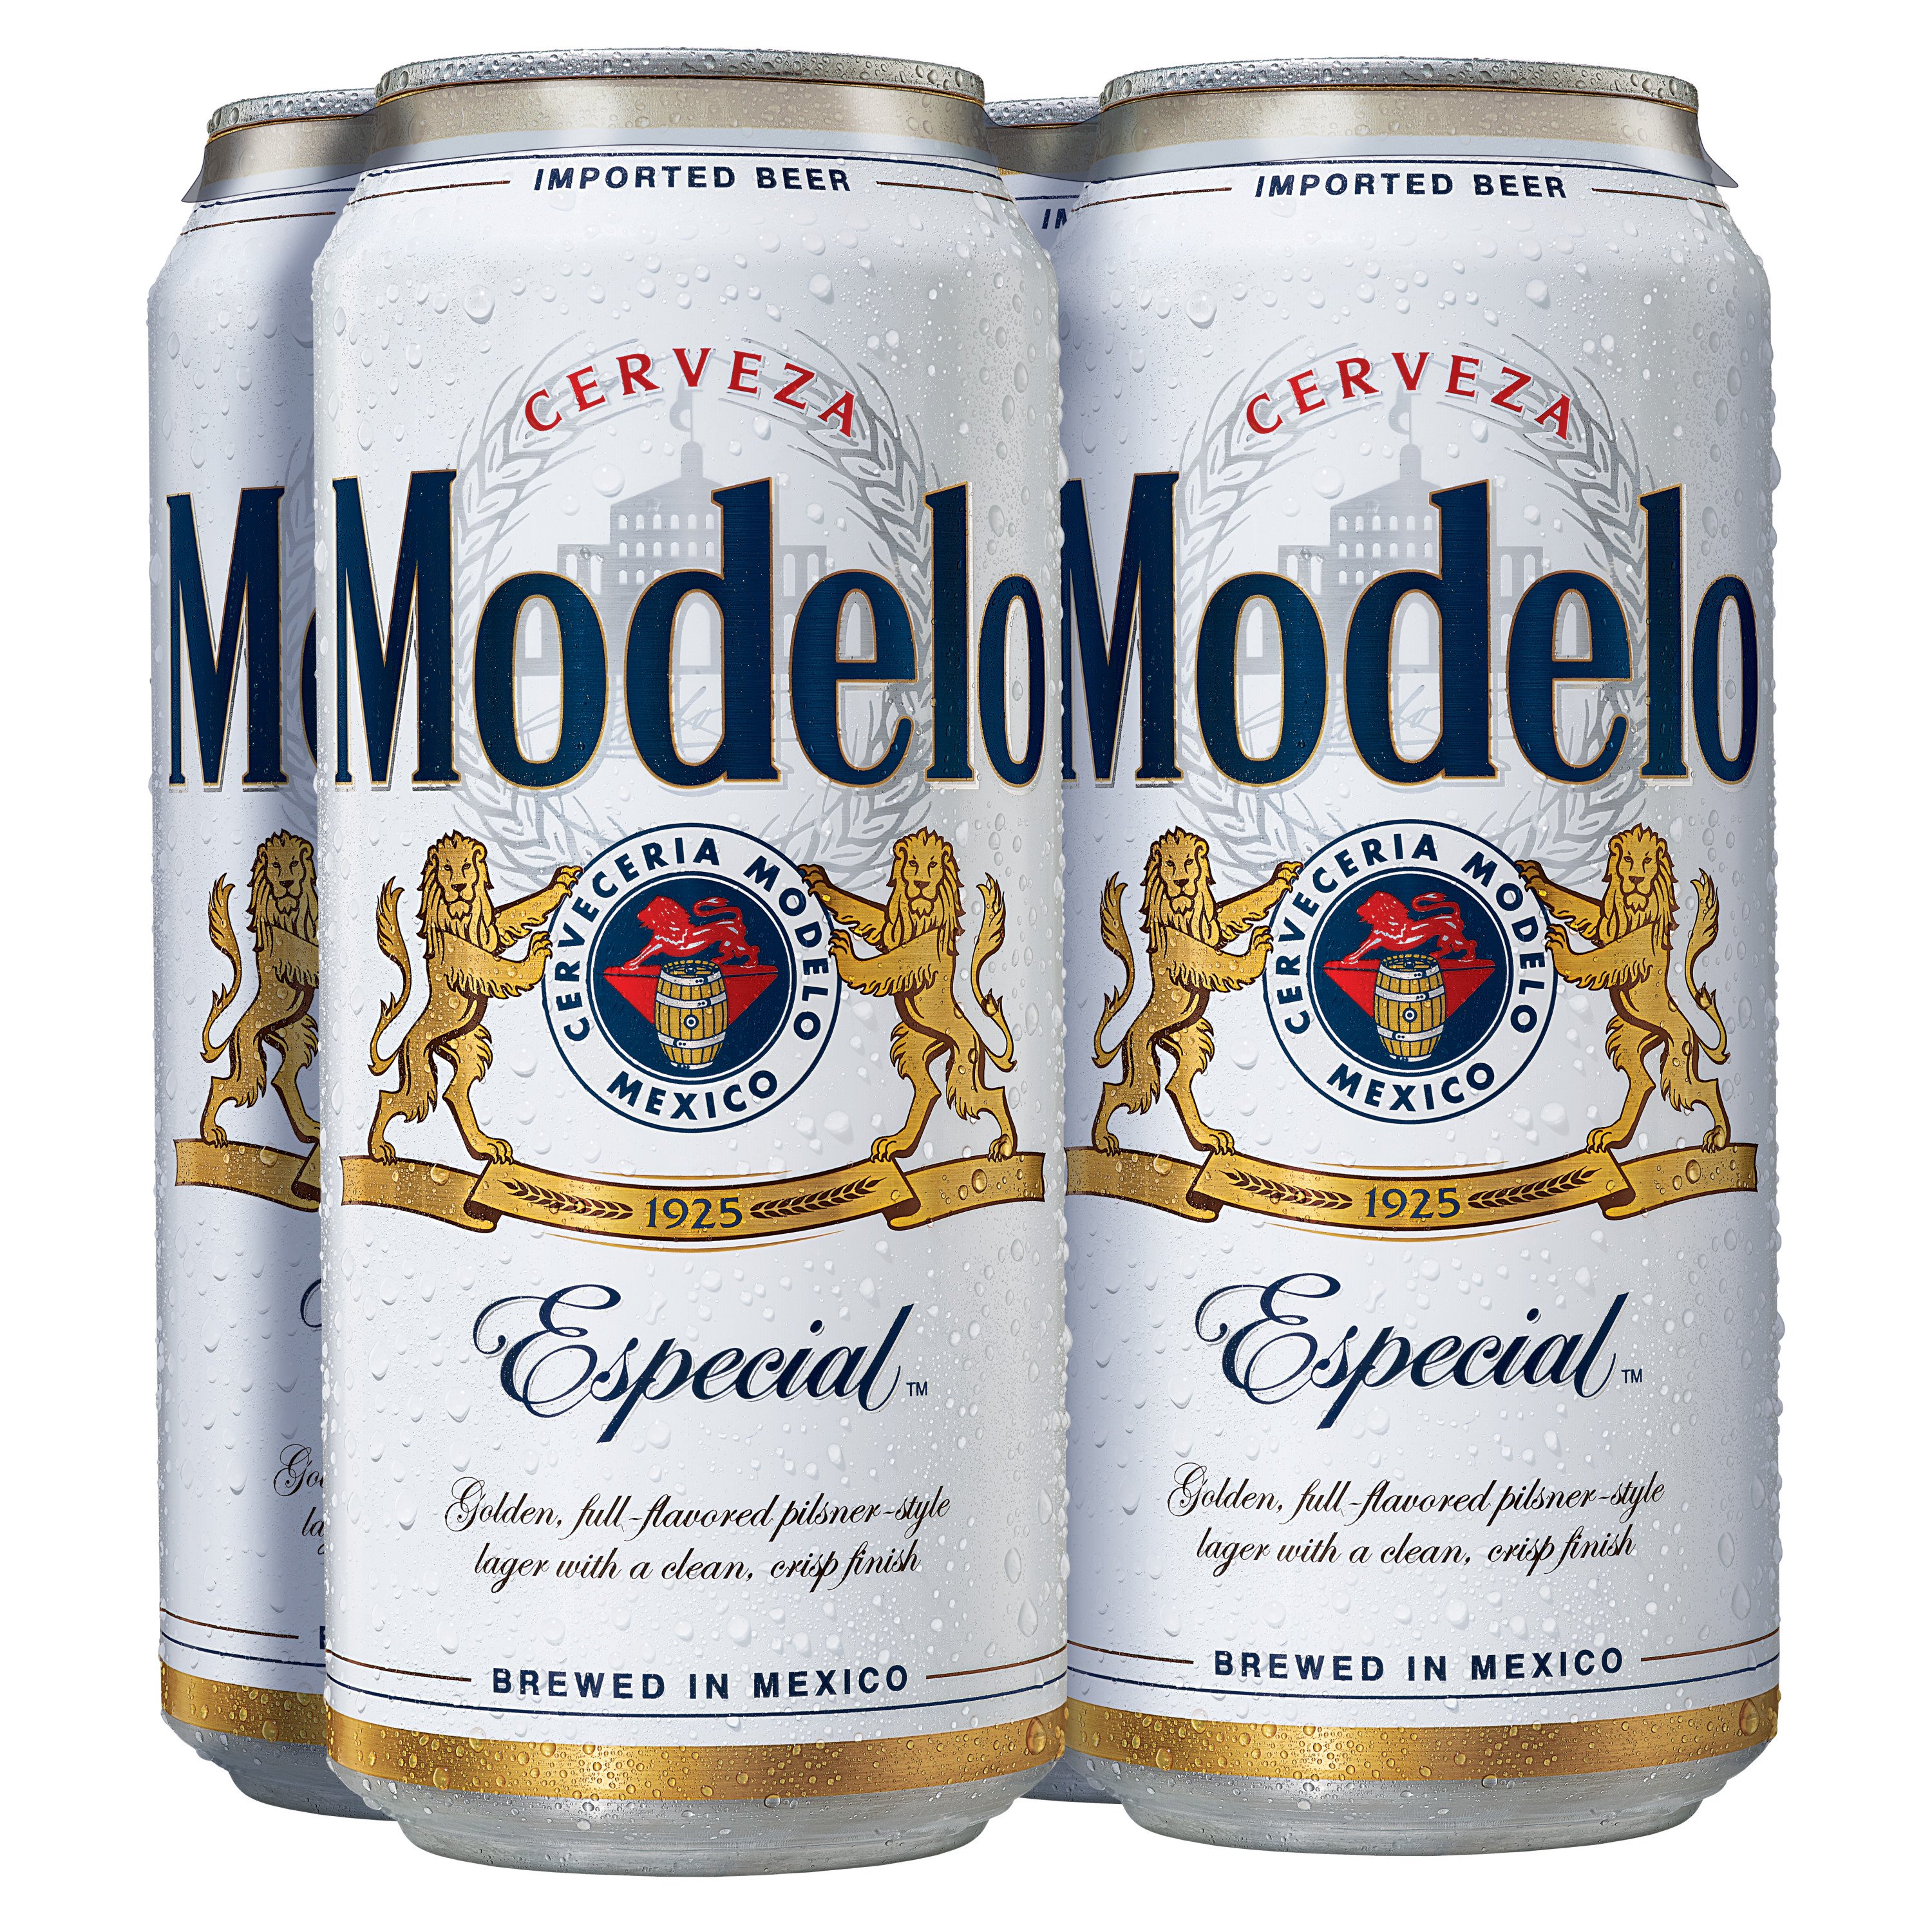 Calories in Cerveza Imported Beer from Modelo